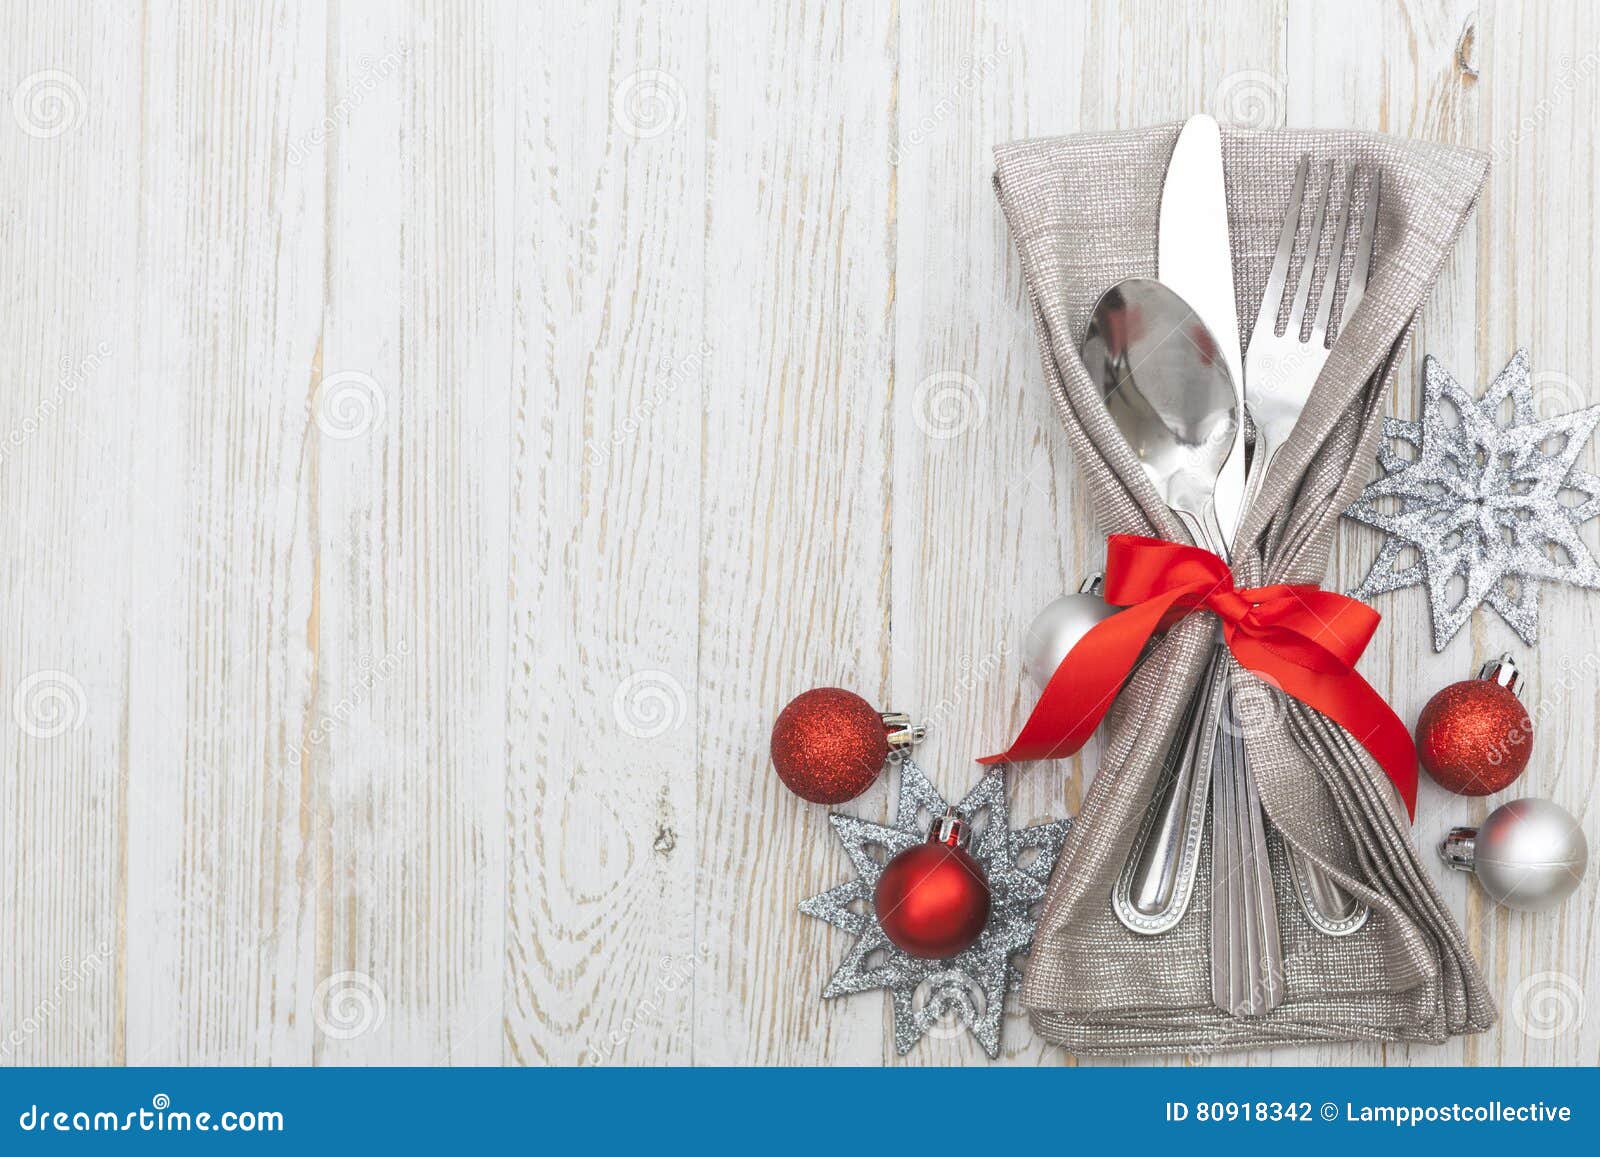 Christmas Meal Table Setting Background Stock Photo - Image of meal ...